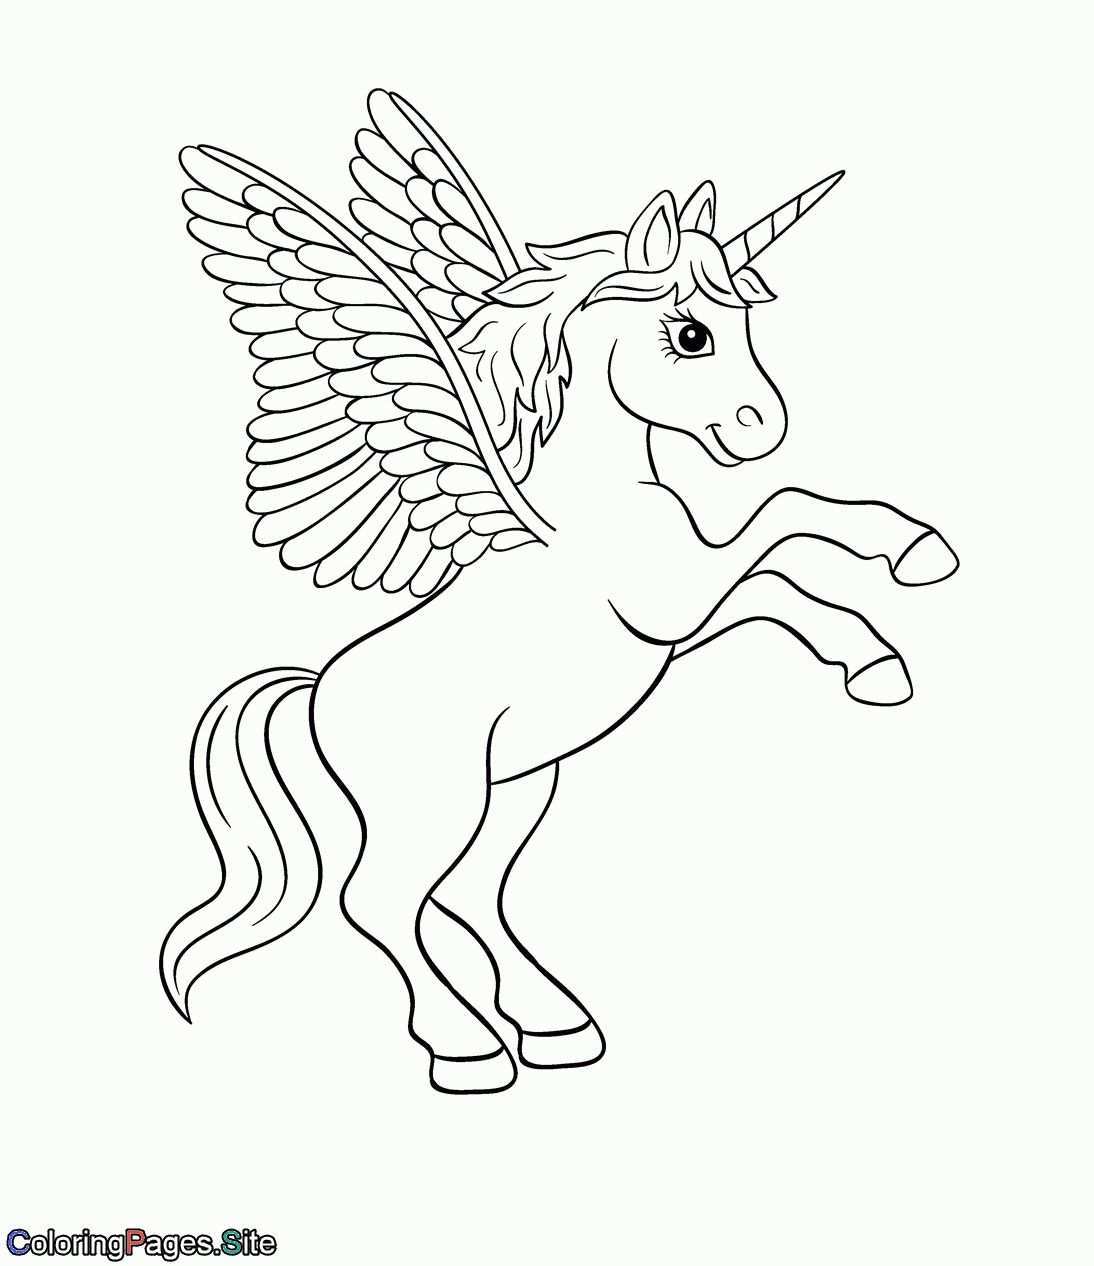 Coloring Pages Unicorn With Wings Coloring Pages Unicorn Pegasus Coloring Pages Unico